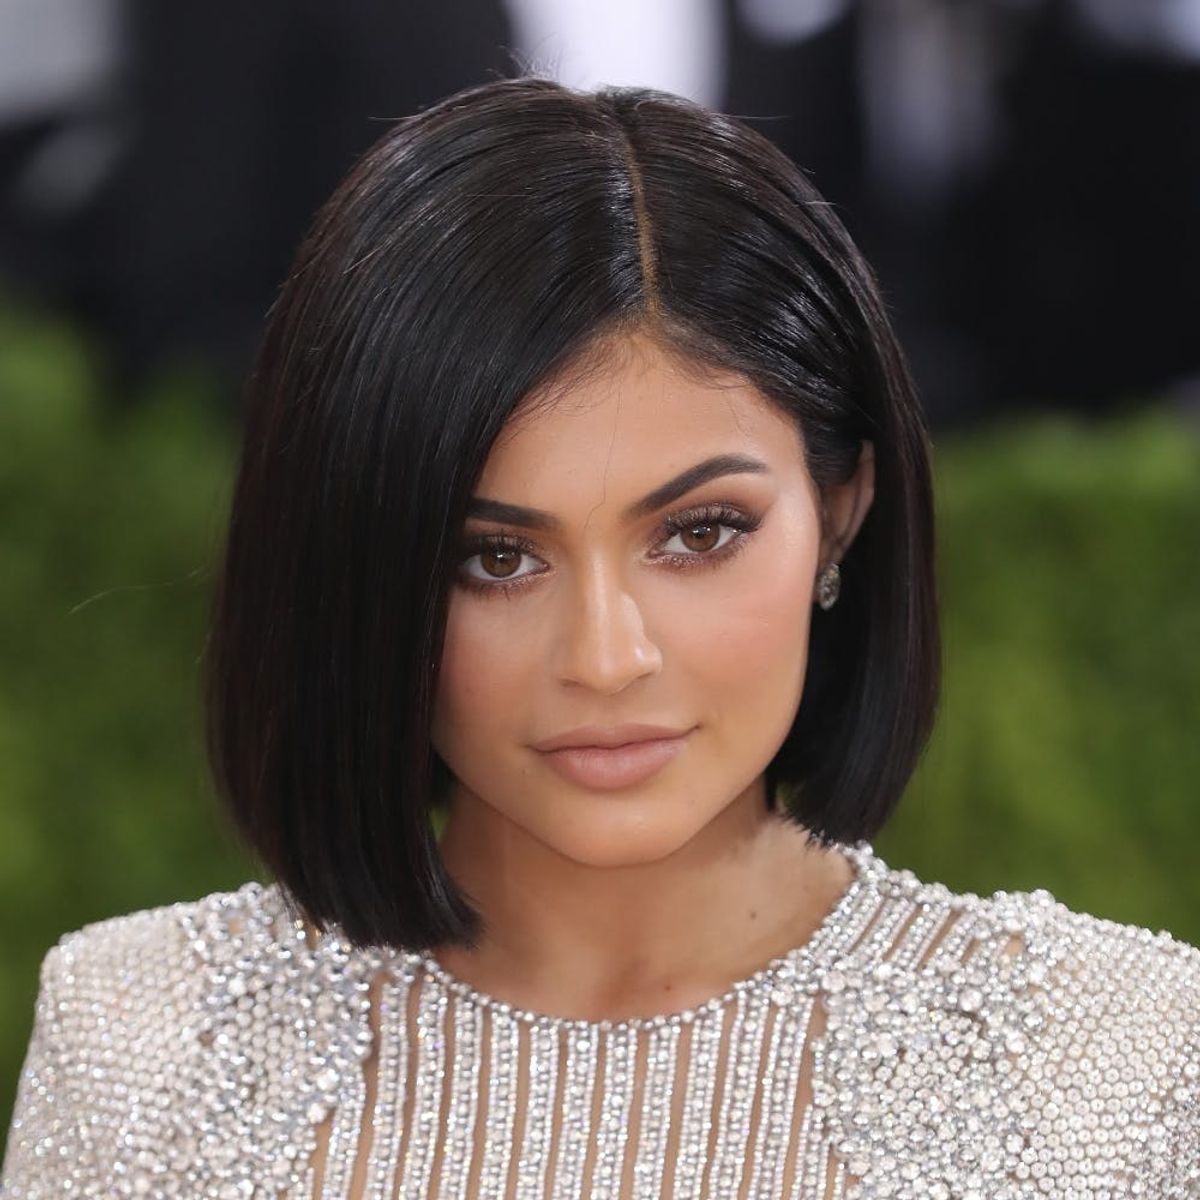 Kylie Jenner’s New Makeup-Free Selfie Reveals One MAJOR Difference